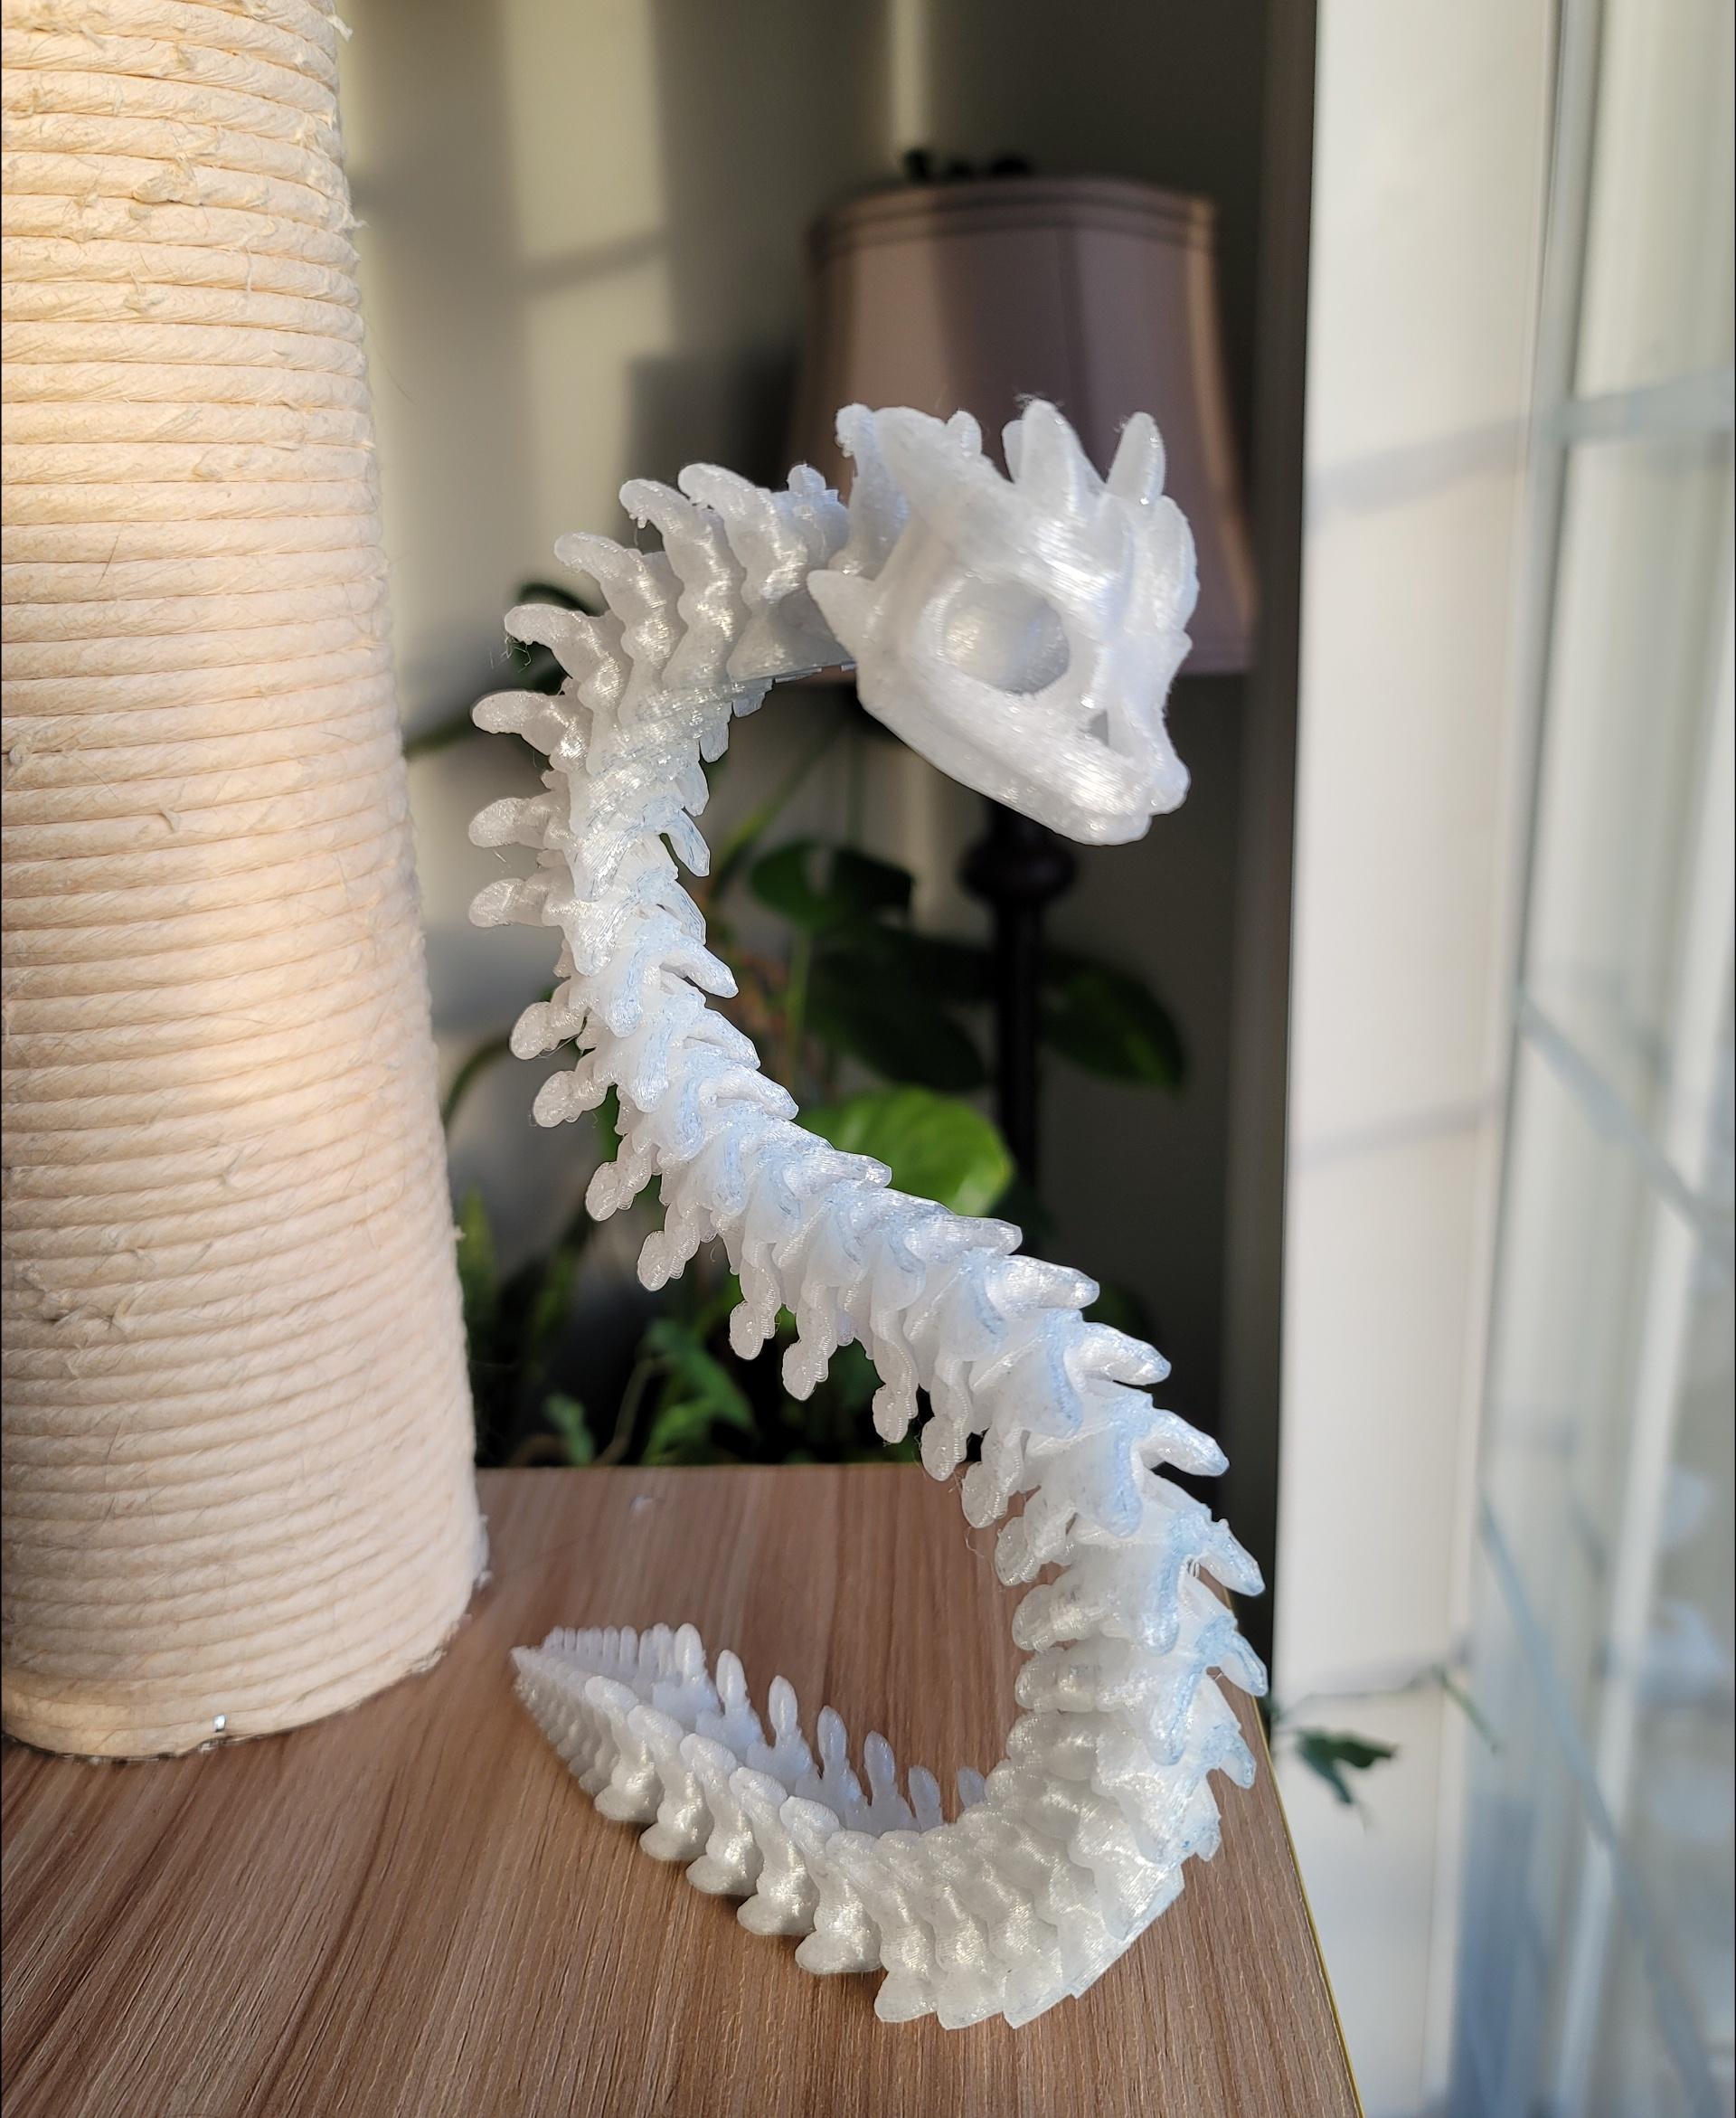 Extra Long Bony Basilisk - Articulated Snap-Flex Fidget (Loose Joints) - Printed on Anycubic Kobra Max, 80mm/sec, .4mm nozzle, .3mm layer height, 3 walls, 20% infill. Giantarm Glow Rainbow PLA 210°/65°, room temp 23°-24°C.

Blue staining on the bottom is transparent blue PETG missed when cleaning the bed between prints 😬 - 3d model